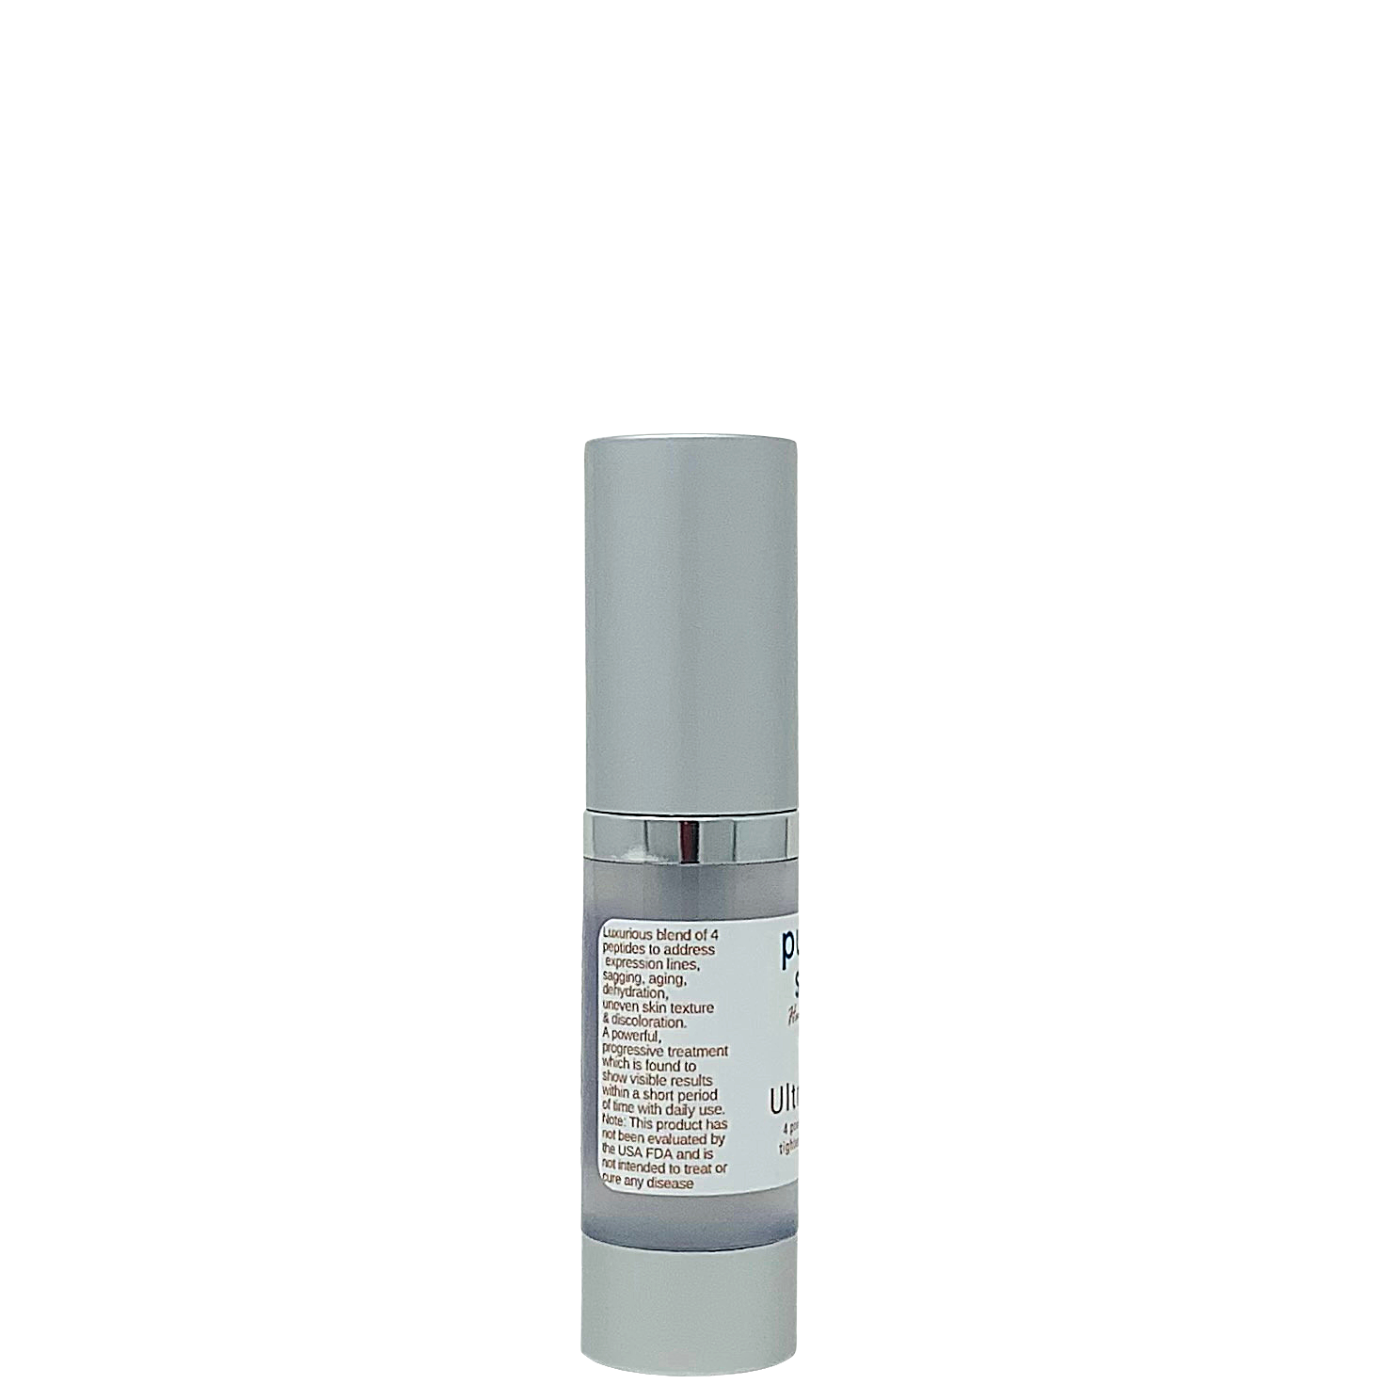 Ultra Peptides, Snap 8, Acetyl Hexapeptide 8, Palmitoyl Tripeptide 1, Decapeptide 12, Hyaluronic Acid - the most potent peptide serum for skin repair, correction, tightening, discoloration